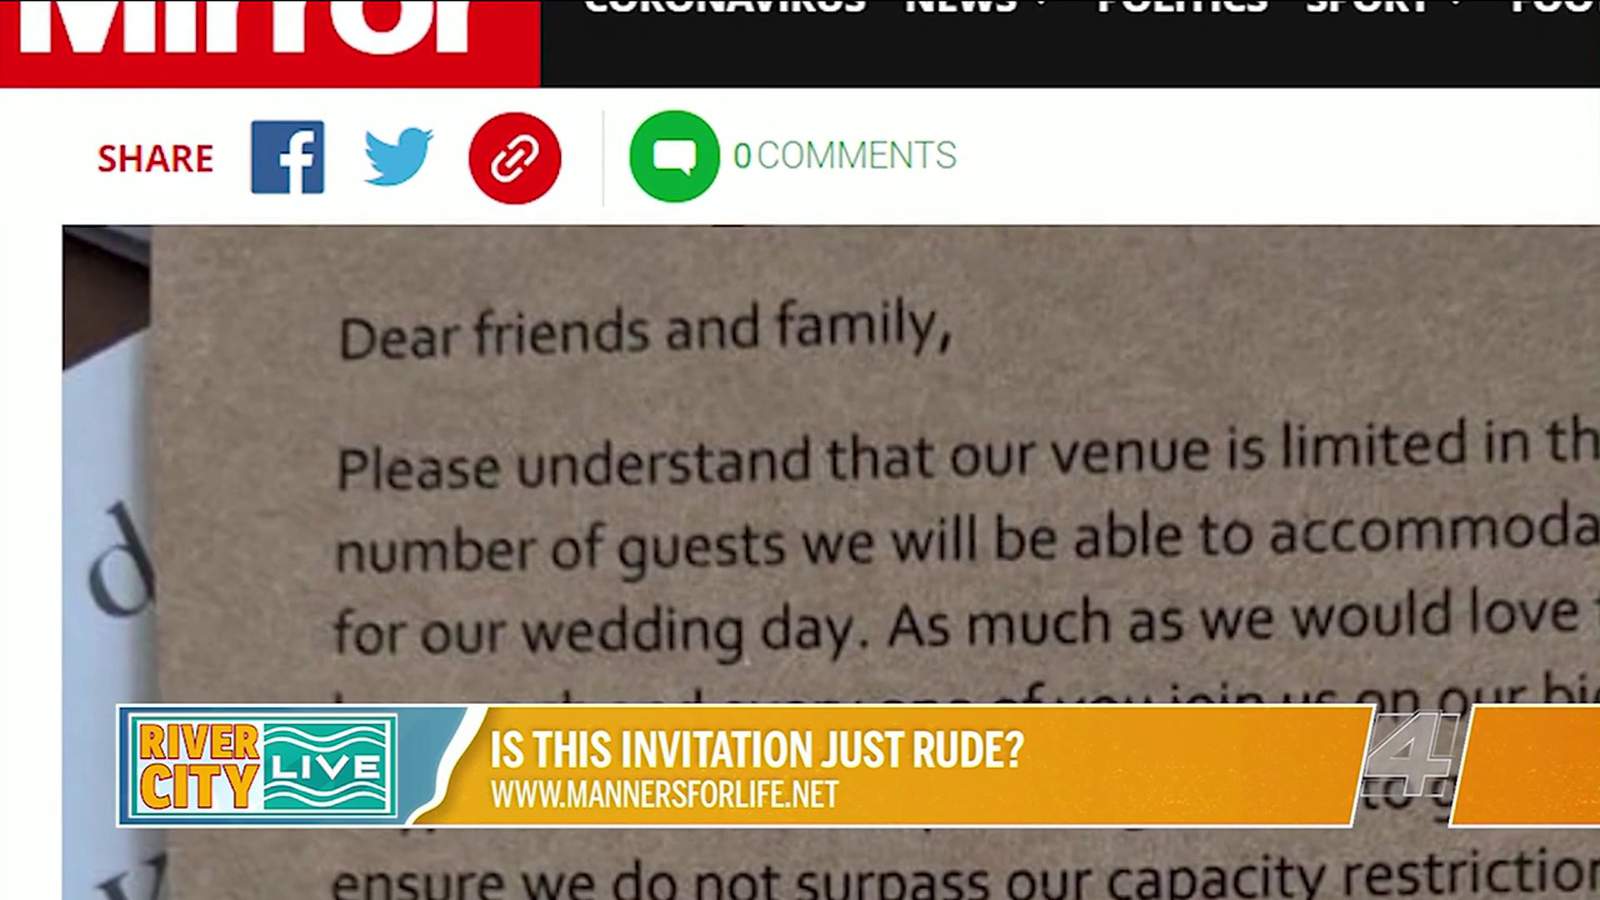 Is This Invitation Just Rude? | River City Live